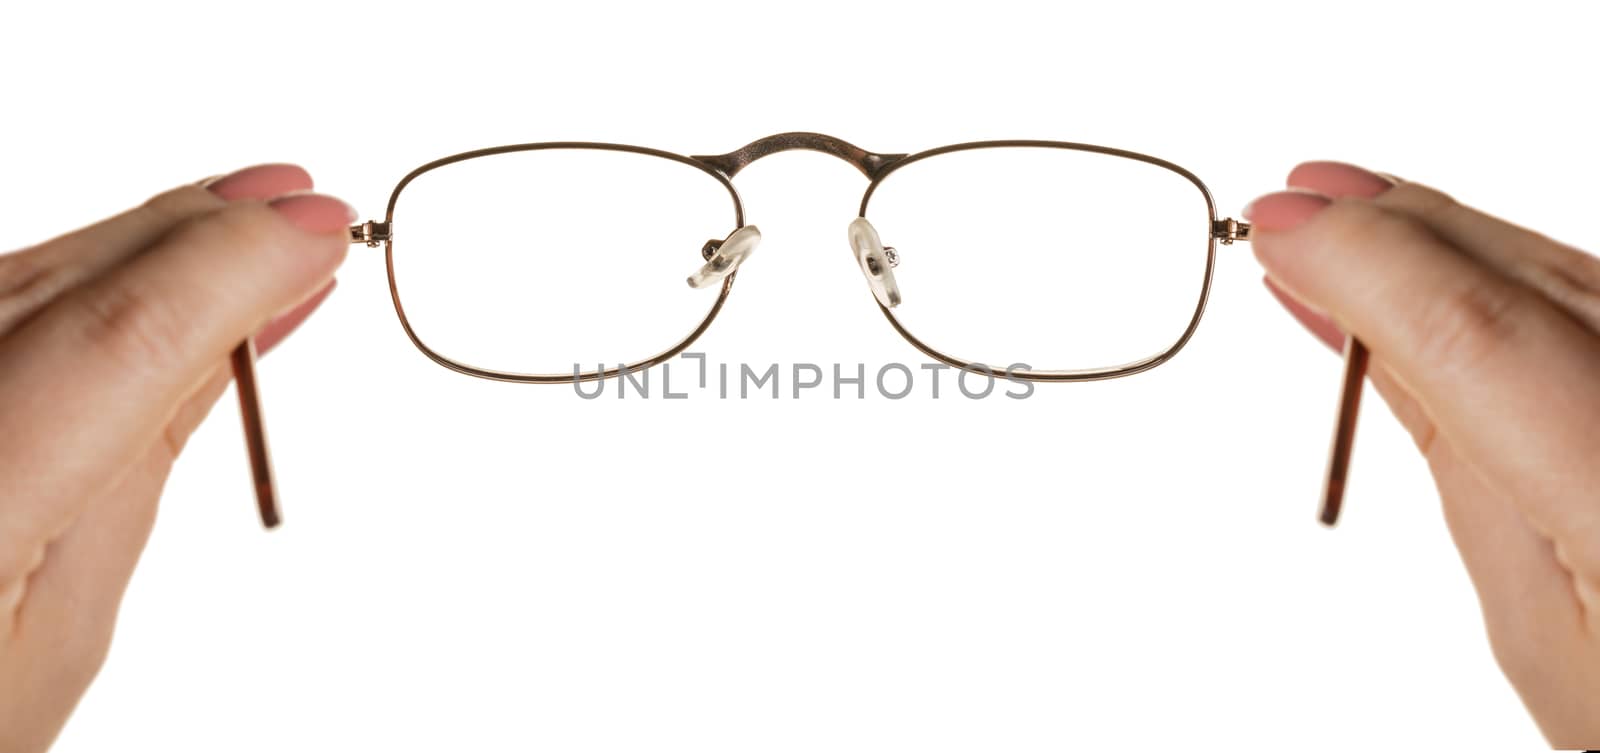 glasses in hand on a white background isolated